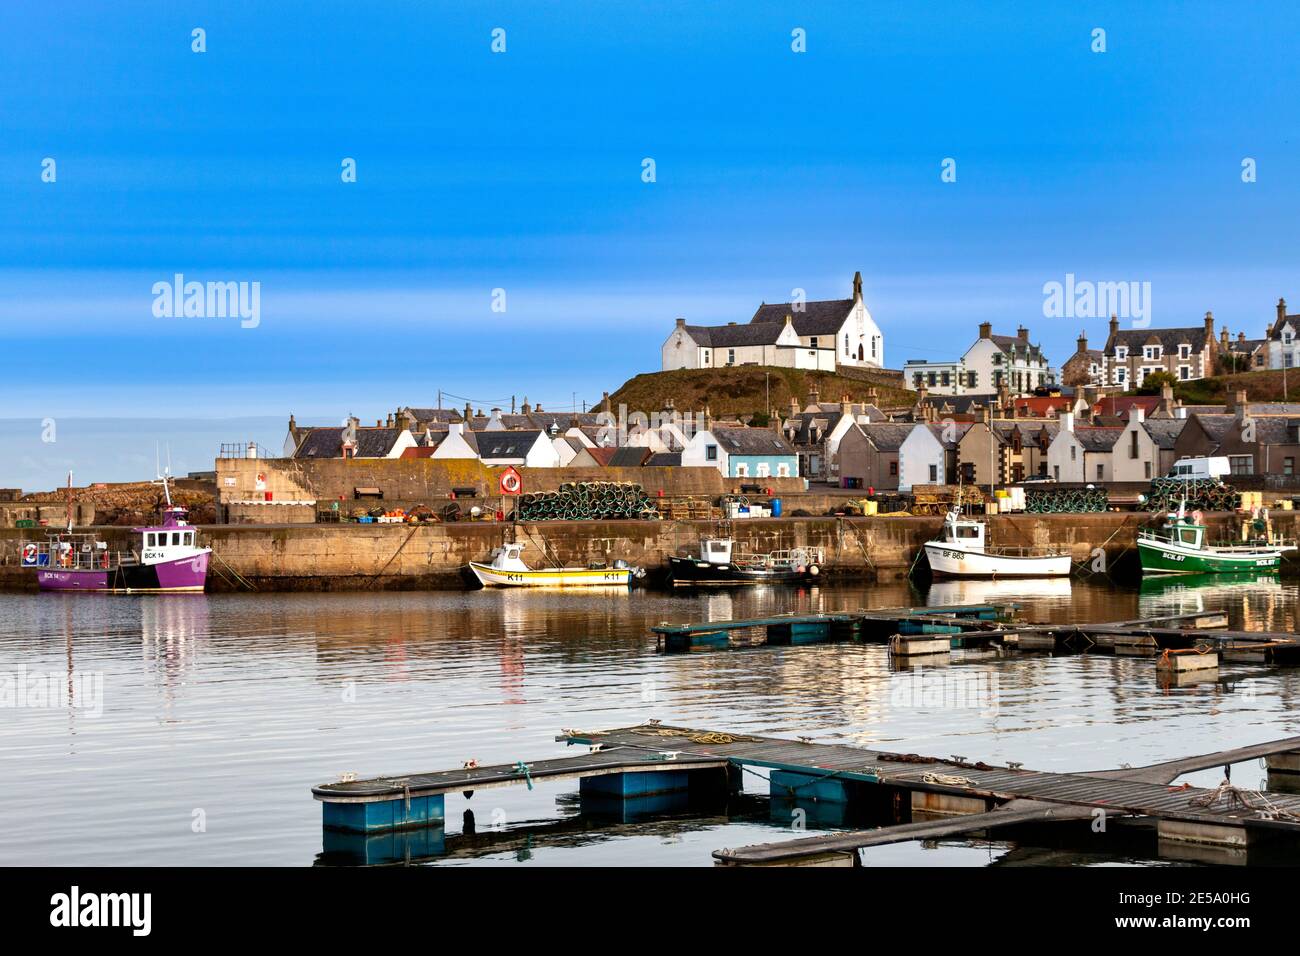 FINDOCHTY MORAY COAST SCOTLAND FISHING BOATS INSIDE THE HARBOUR WHITE CHURCH AND HOUSES ON THE HILL Stock Photo